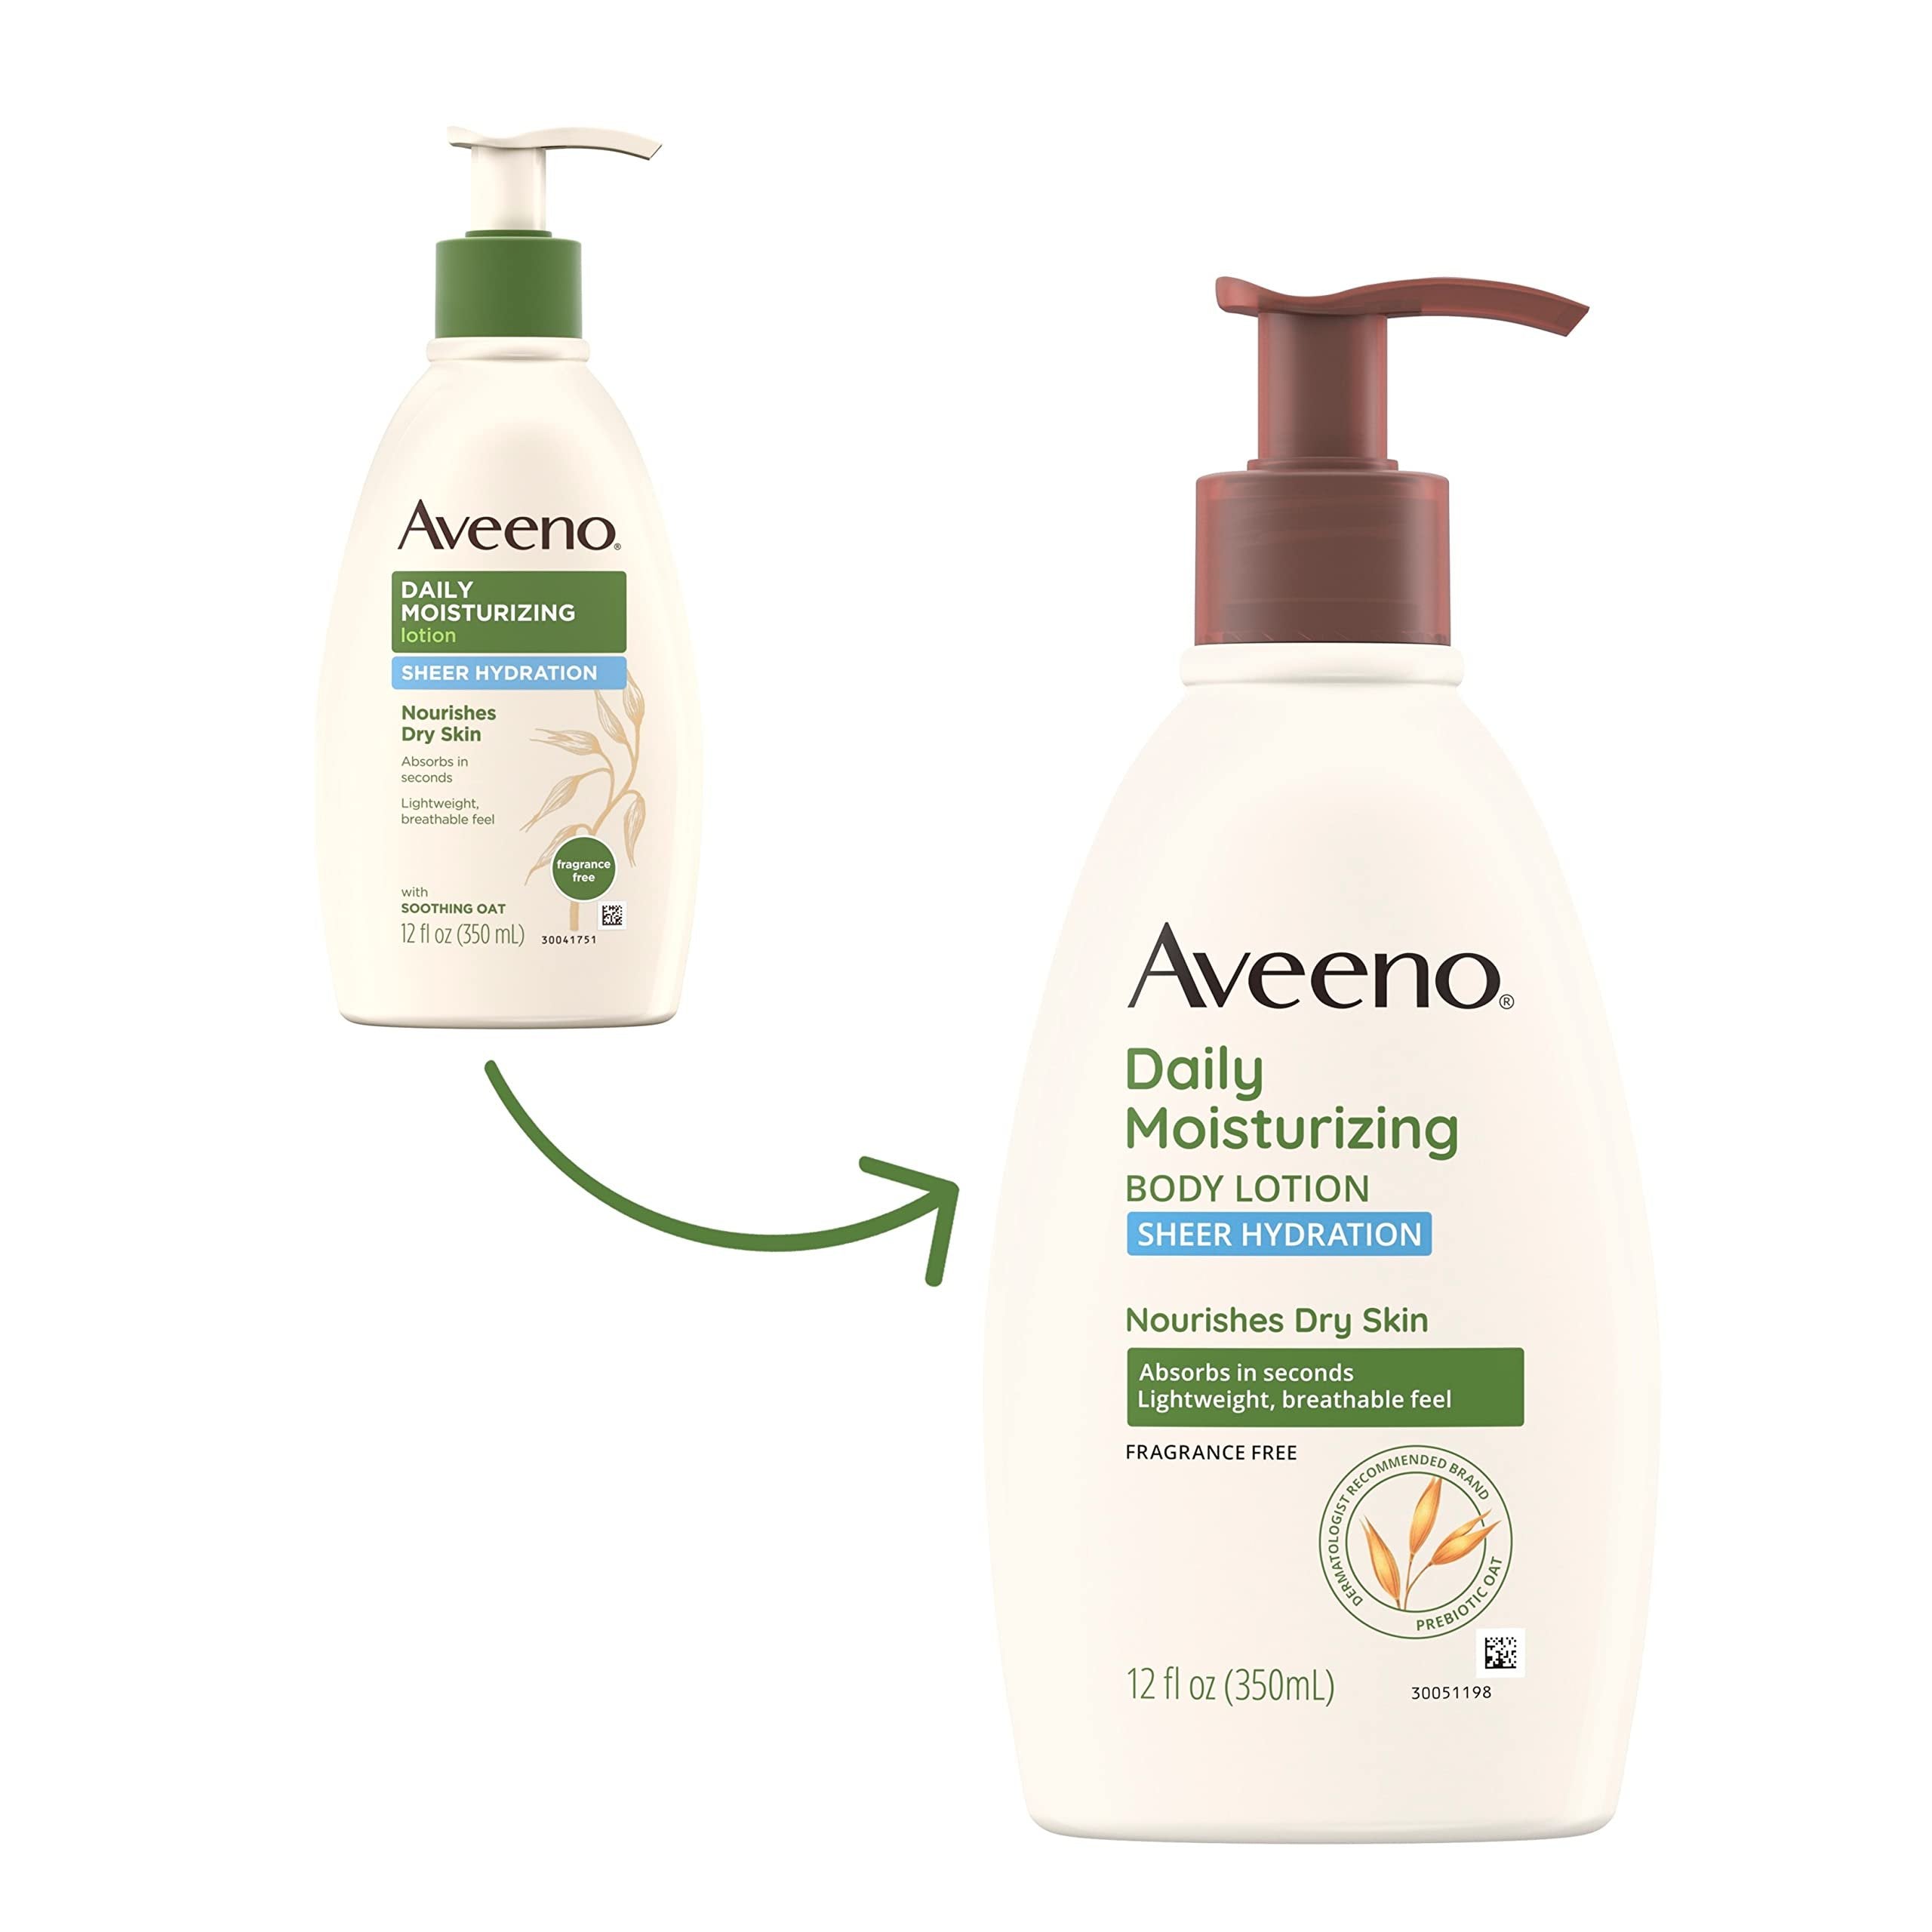 Aveeno Sheer Hydration Daily Moisturizing Fragrance-Free Lotion with Nourishing Prebiotic Oat, Fast-Absorbing Body Moisturizer for Dry Skin with Lightweight, Breathable Feel, 12 fl. oz (Pack of 2)